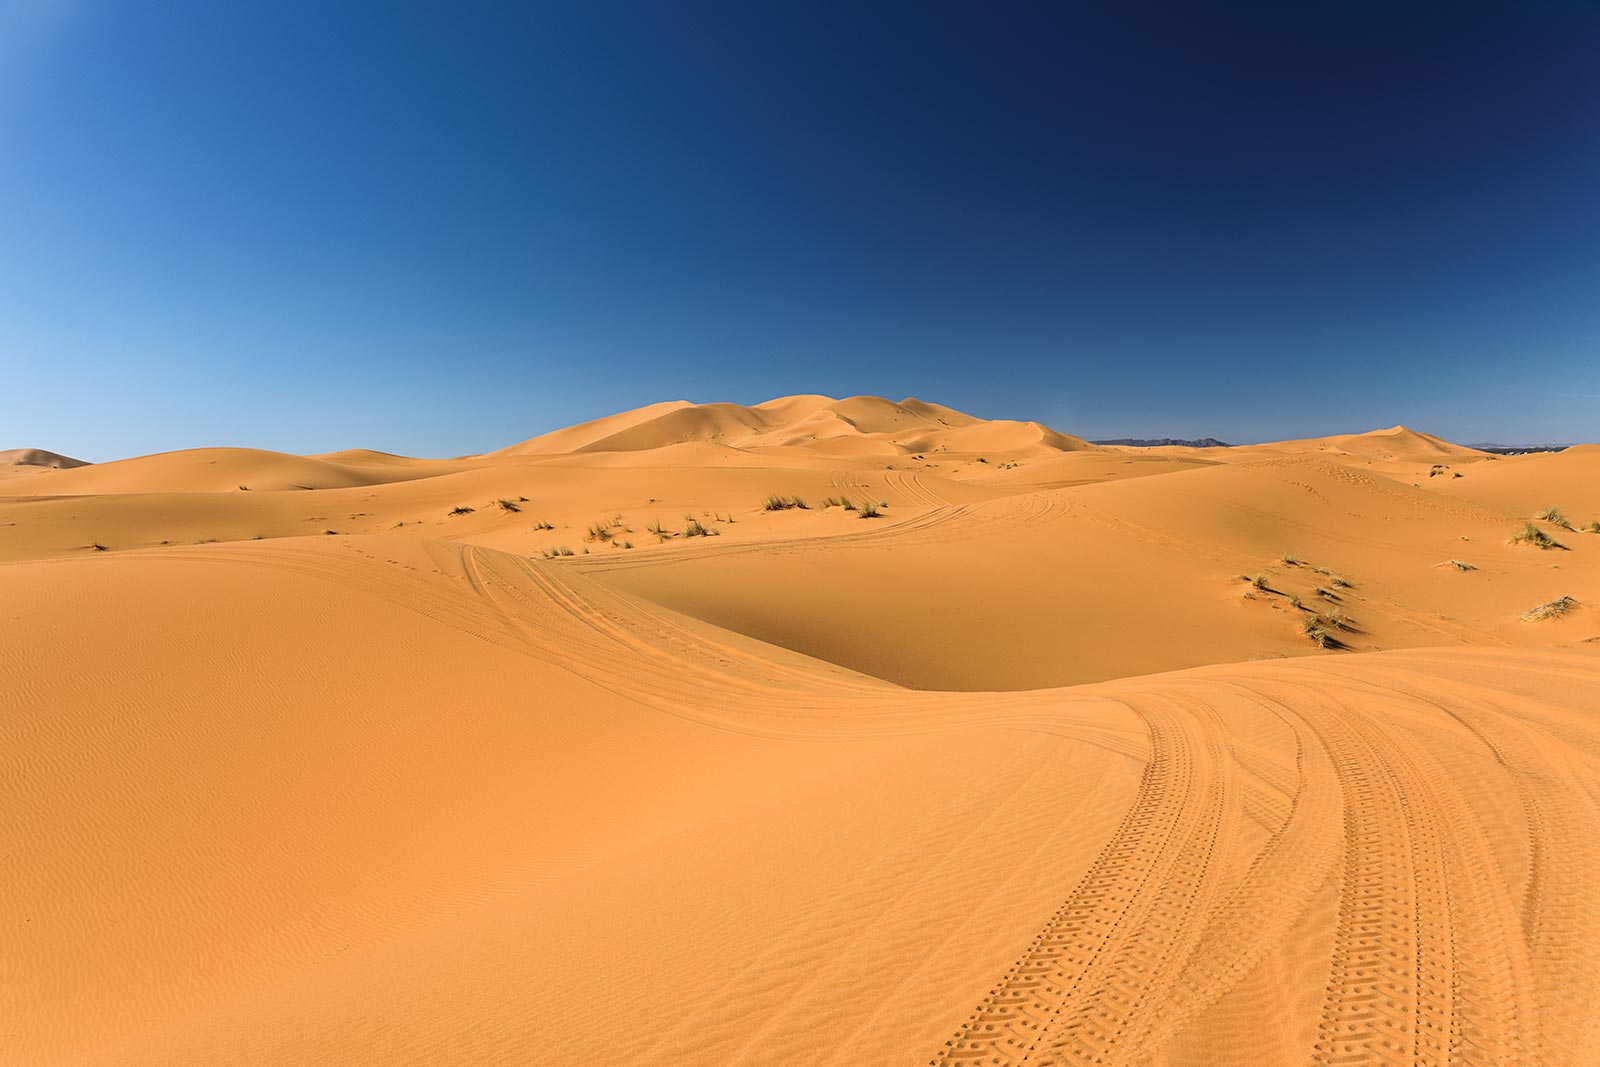 The highest dunes are those near, or just south of, Merzouga itself, peaking with the aptly named Grand Dune de Merzouga, a golden mountain recognisable.